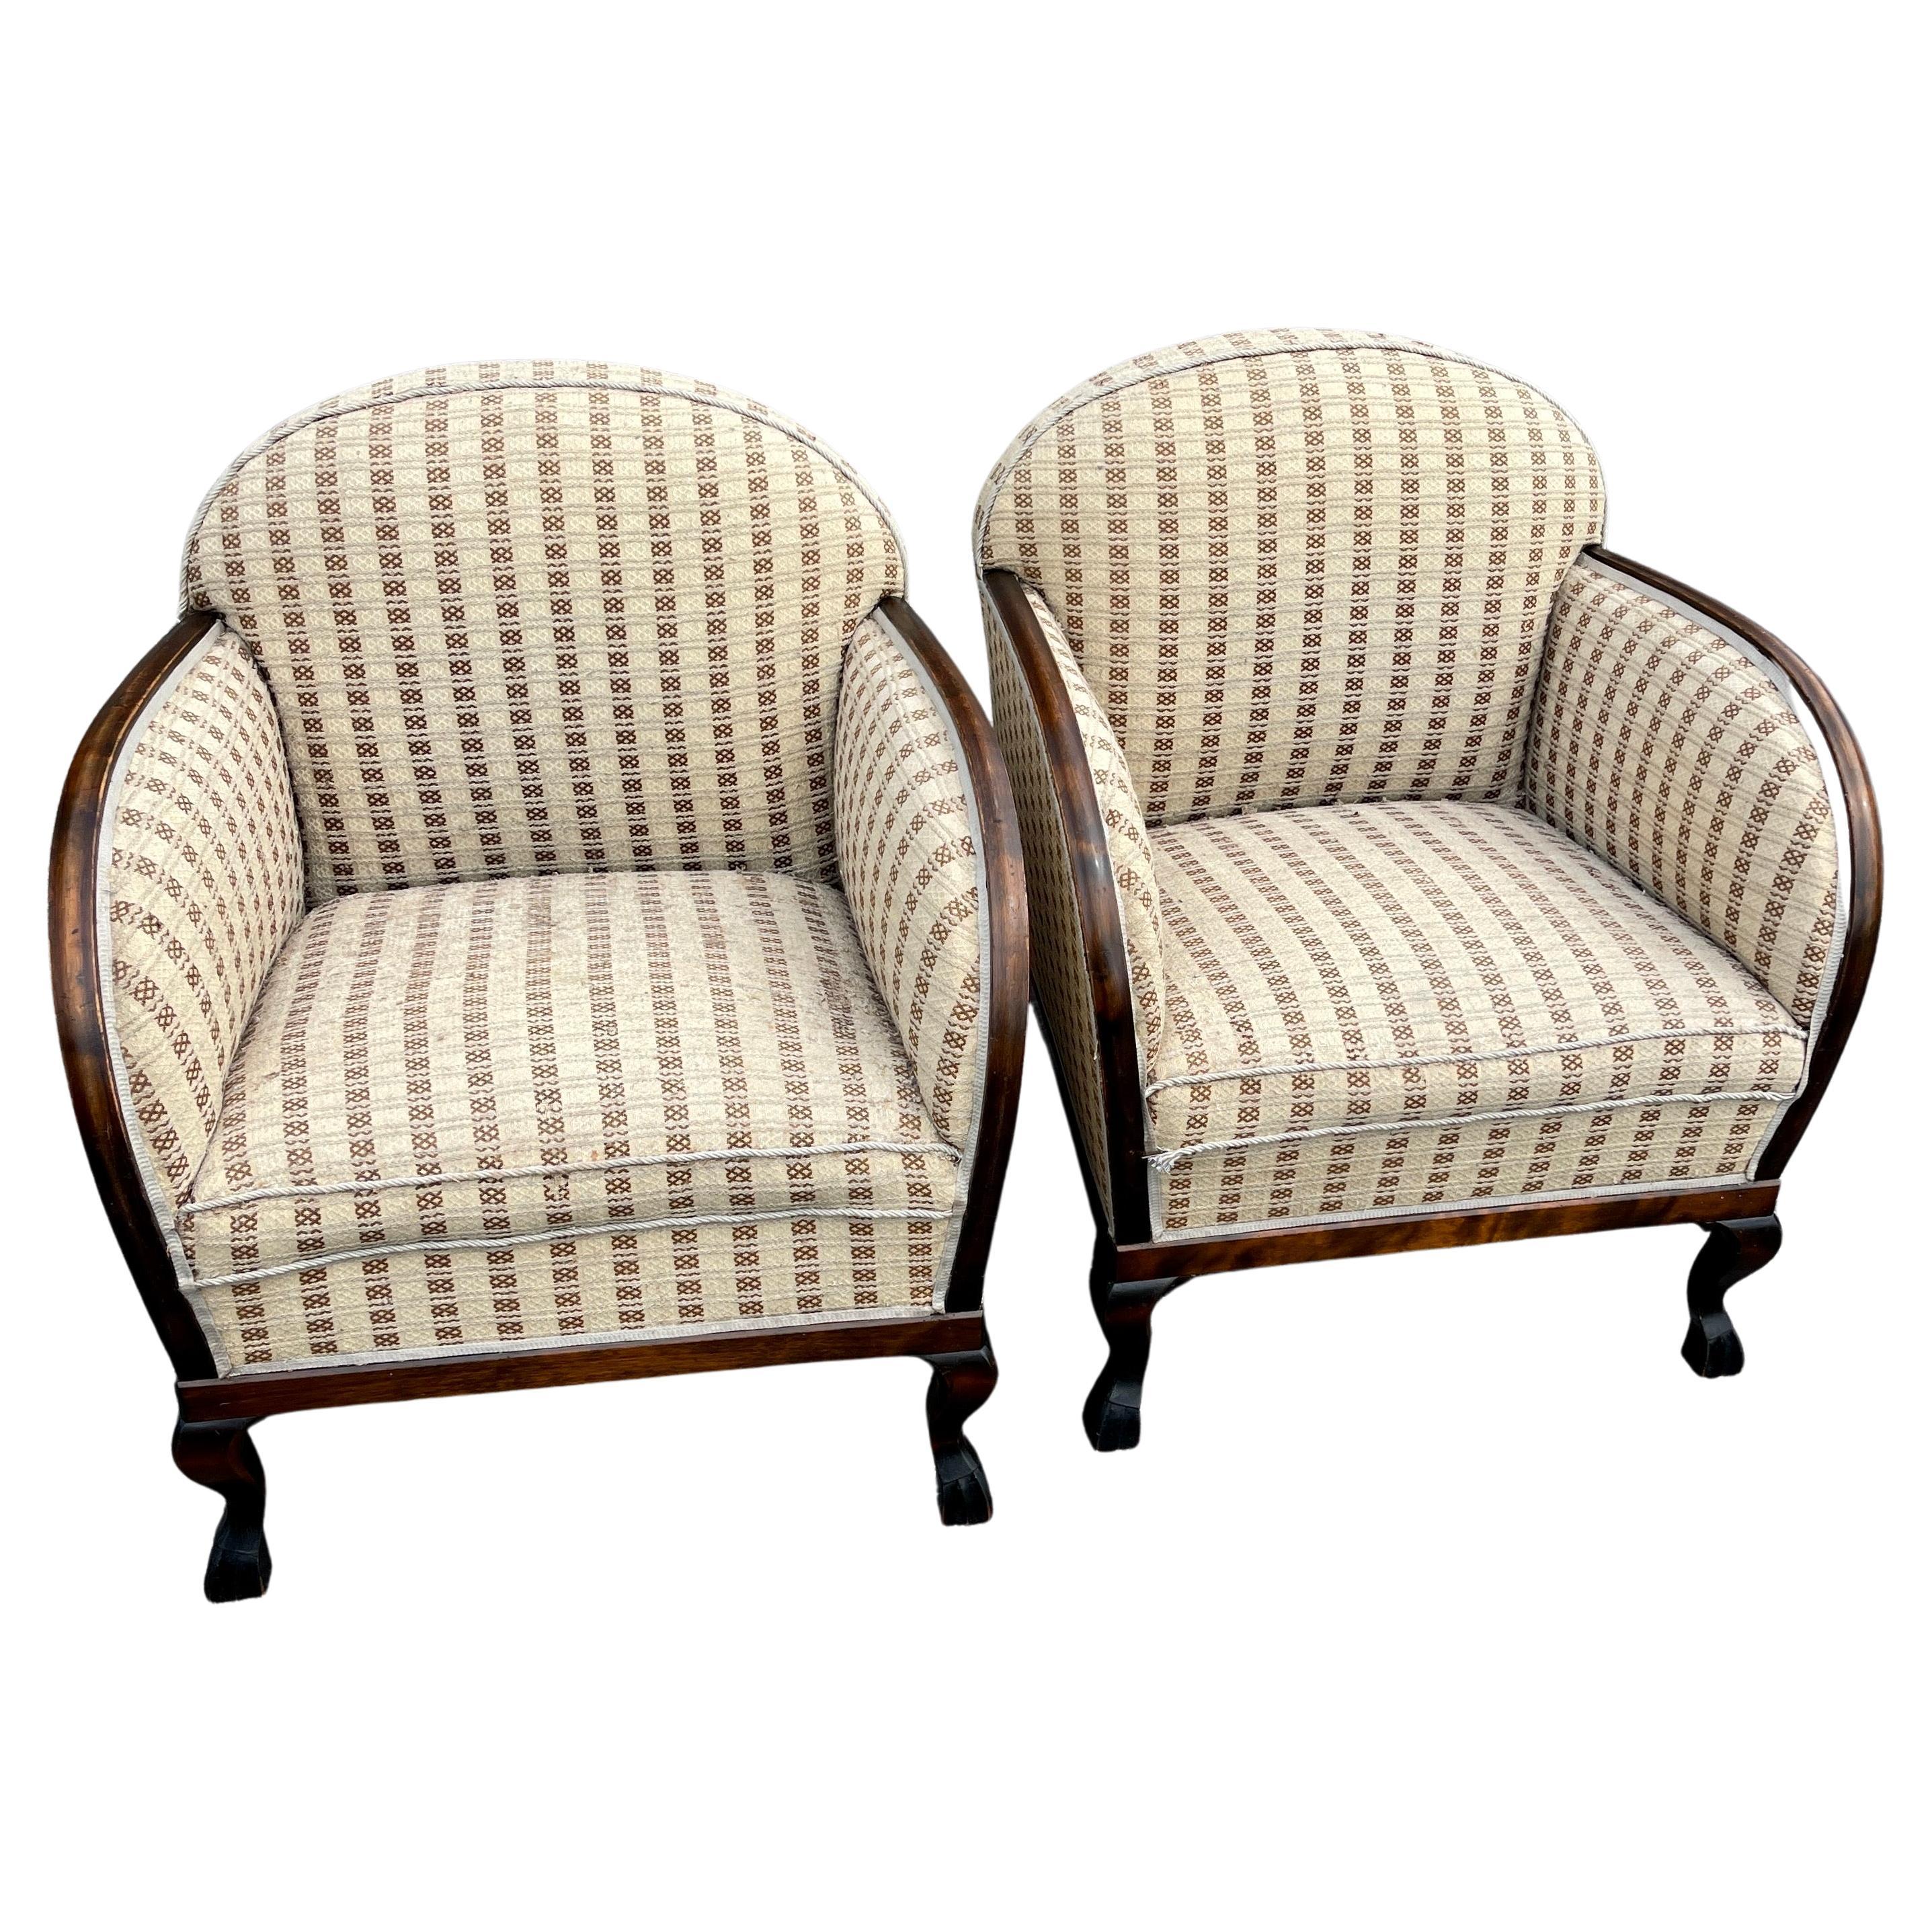 1930s chair styles